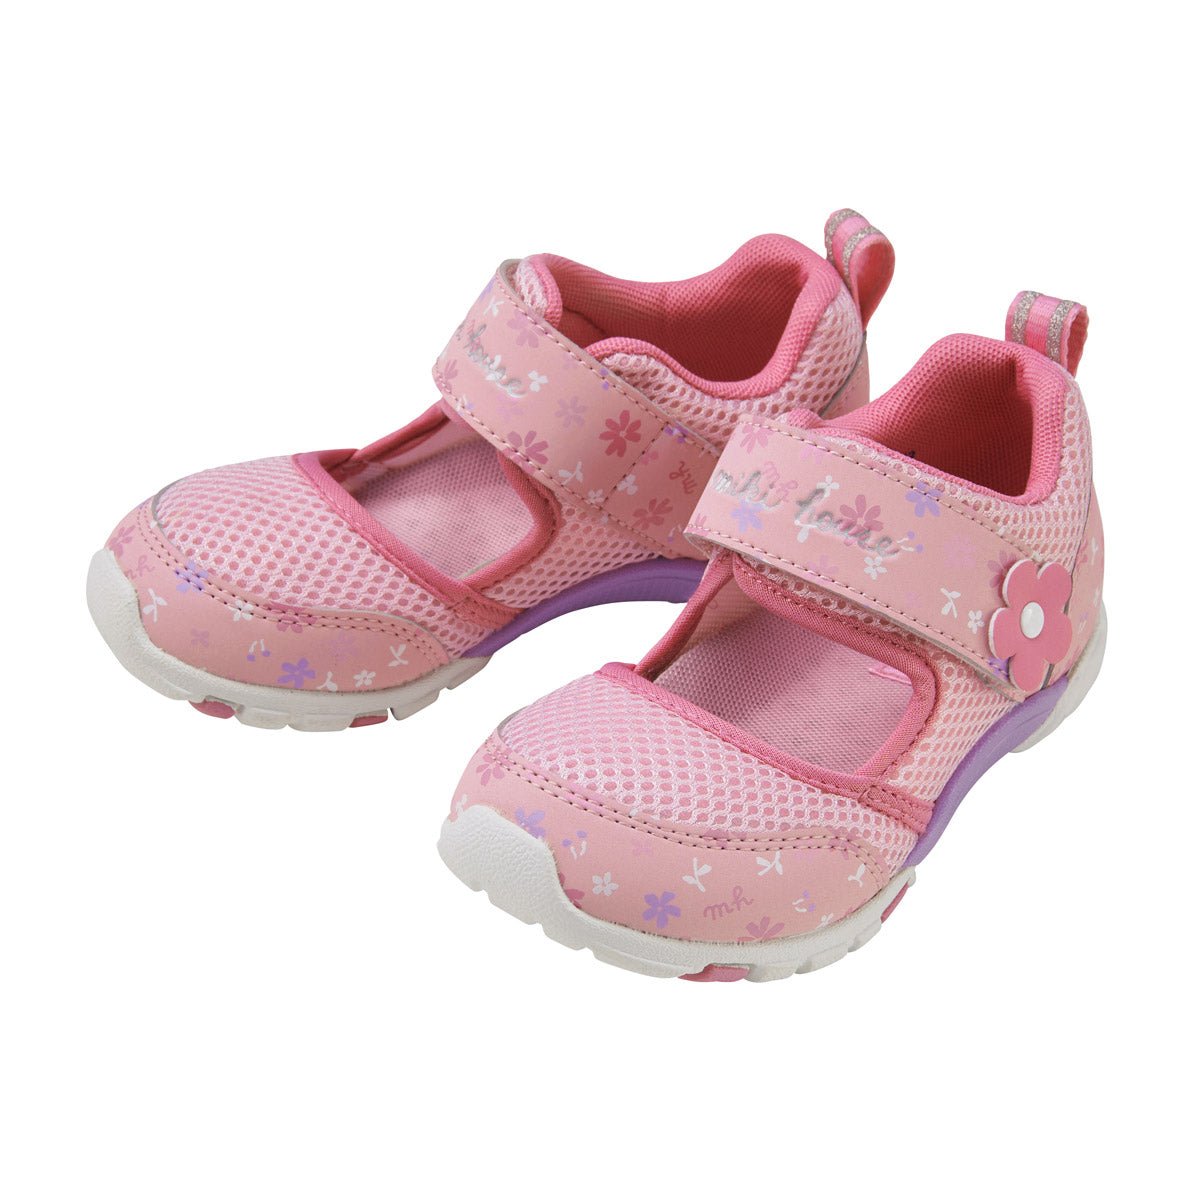 Floral Mesh Sandals for Kids - MIKI HOUSE USA